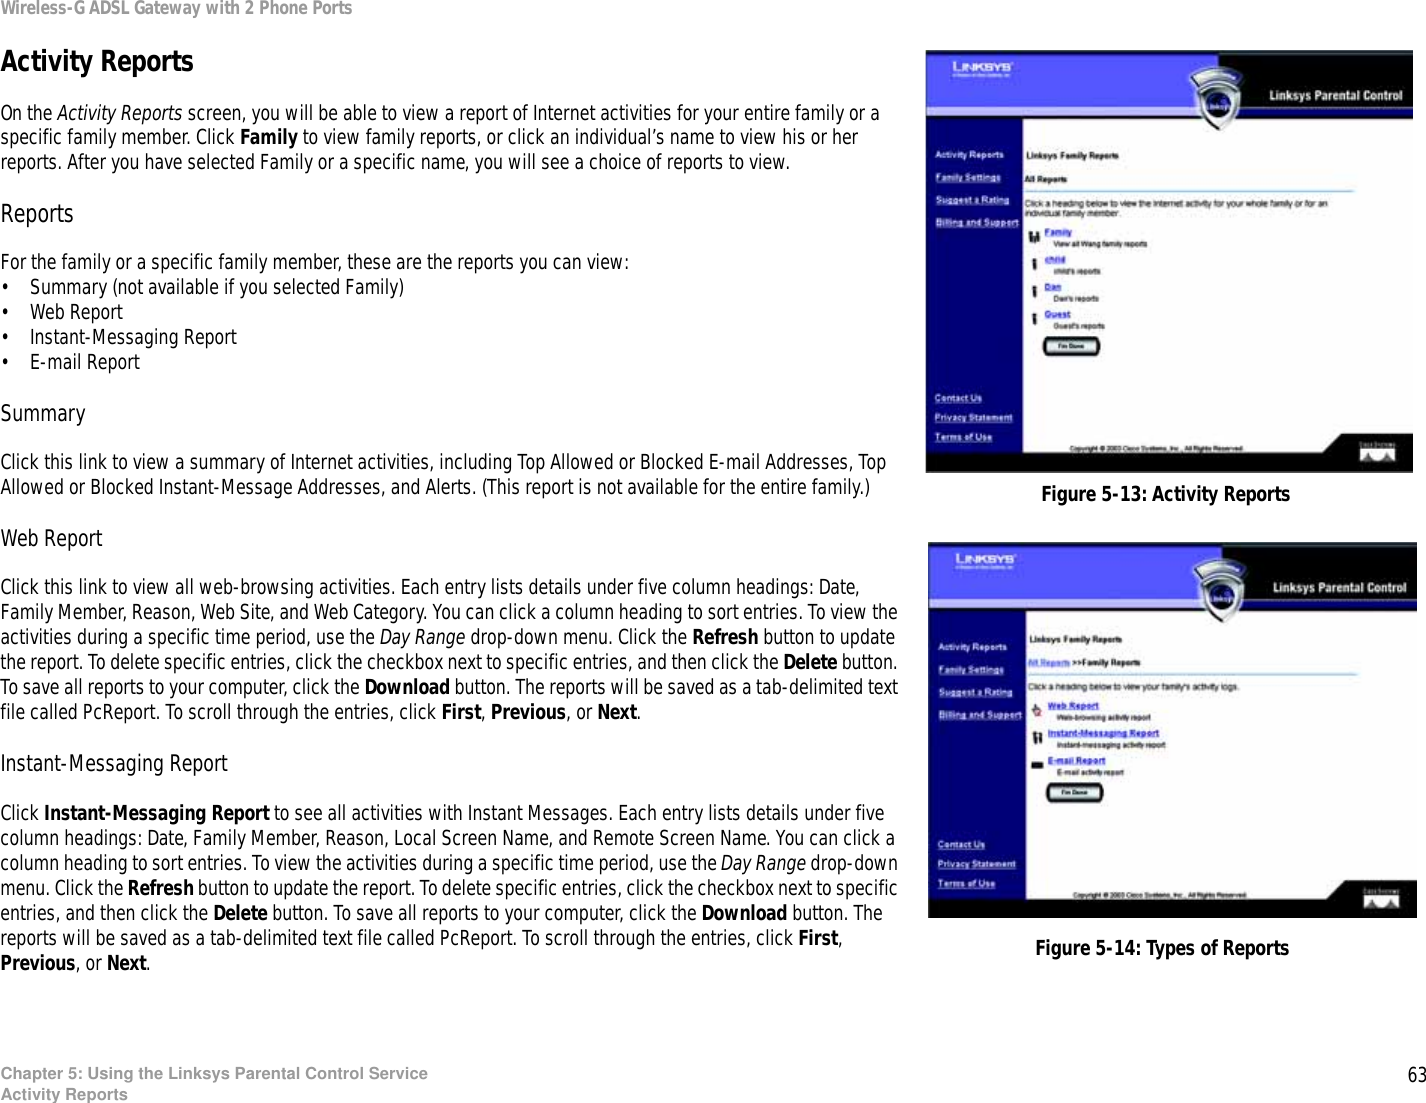 63Chapter 5: Using the Linksys Parental Control ServiceActivity ReportsWireless-G ADSL Gateway with 2 Phone PortsActivity ReportsOn the Activity Reports screen, you will be able to view a report of Internet activities for your entire family or a specific family member. Click Family to view family reports, or click an individual’s name to view his or her reports. After you have selected Family or a specific name, you will see a choice of reports to view.ReportsFor the family or a specific family member, these are the reports you can view:• Summary (not available if you selected Family)• Web Report• Instant-Messaging Report• E-mail ReportSummaryClick this link to view a summary of Internet activities, including Top Allowed or Blocked E-mail Addresses, Top Allowed or Blocked Instant-Message Addresses, and Alerts. (This report is not available for the entire family.)Web ReportClick this link to view all web-browsing activities. Each entry lists details under five column headings: Date, Family Member, Reason, Web Site, and Web Category. You can click a column heading to sort entries. To view the activities during a specific time period, use the Day Range drop-down menu. Click the Refresh button to update the report. To delete specific entries, click the checkbox next to specific entries, and then click the Delete button. To save all reports to your computer, click the Download button. The reports will be saved as a tab-delimited text file called PcReport. To scroll through the entries, click First, Previous, or Next.Instant-Messaging ReportClick Instant-Messaging Report to see all activities with Instant Messages. Each entry lists details under five column headings: Date, Family Member, Reason, Local Screen Name, and Remote Screen Name. You can click a column heading to sort entries. To view the activities during a specific time period, use the Day Range drop-down menu. Click the Refresh button to update the report. To delete specific entries, click the checkbox next to specific entries, and then click the Delete button. To save all reports to your computer, click the Download button. The reports will be saved as a tab-delimited text file called PcReport. To scroll through the entries, click First, Previous, or Next.Figure 5-13: Activity ReportsFigure 5-14: Types of Reports